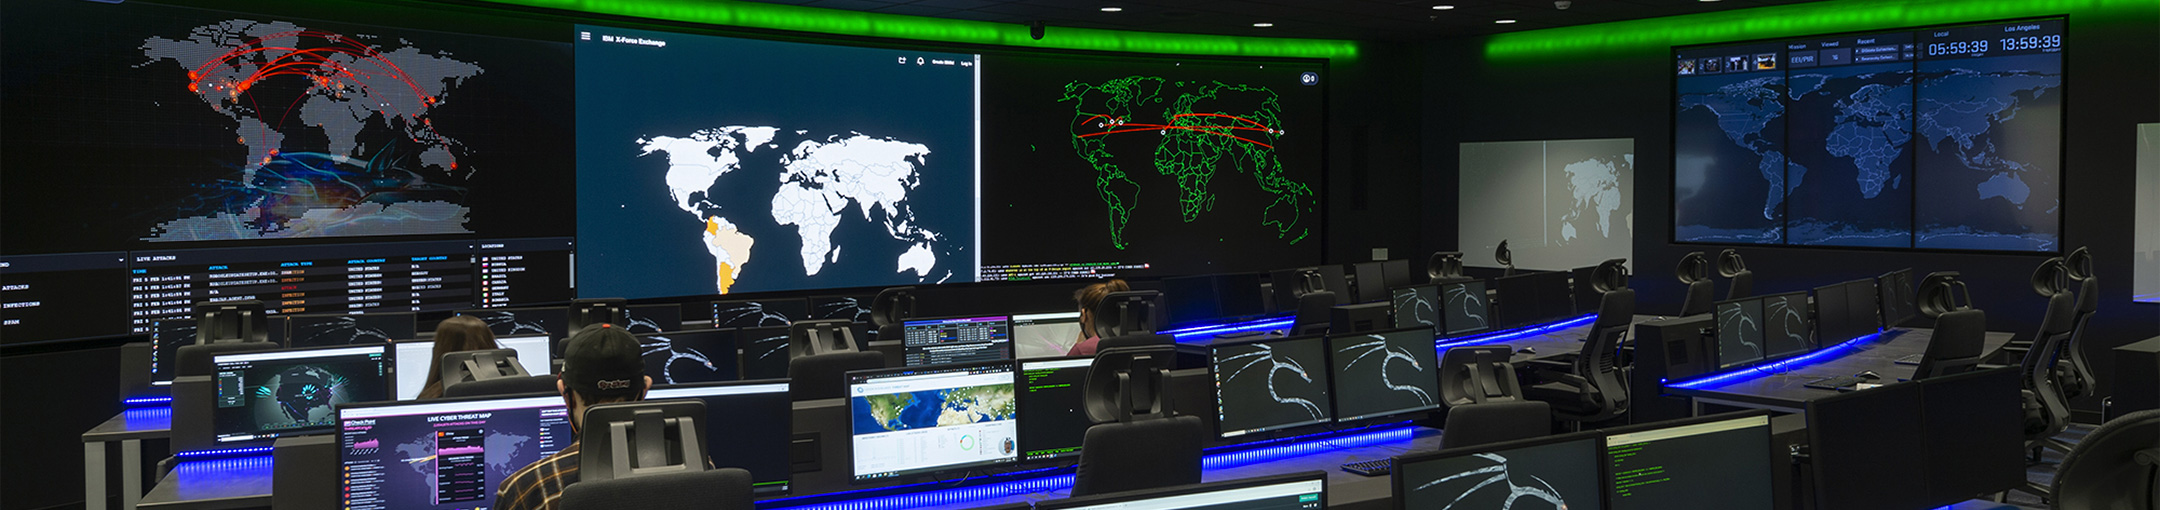 Cybersecurity room with monitoring equipment and displays.